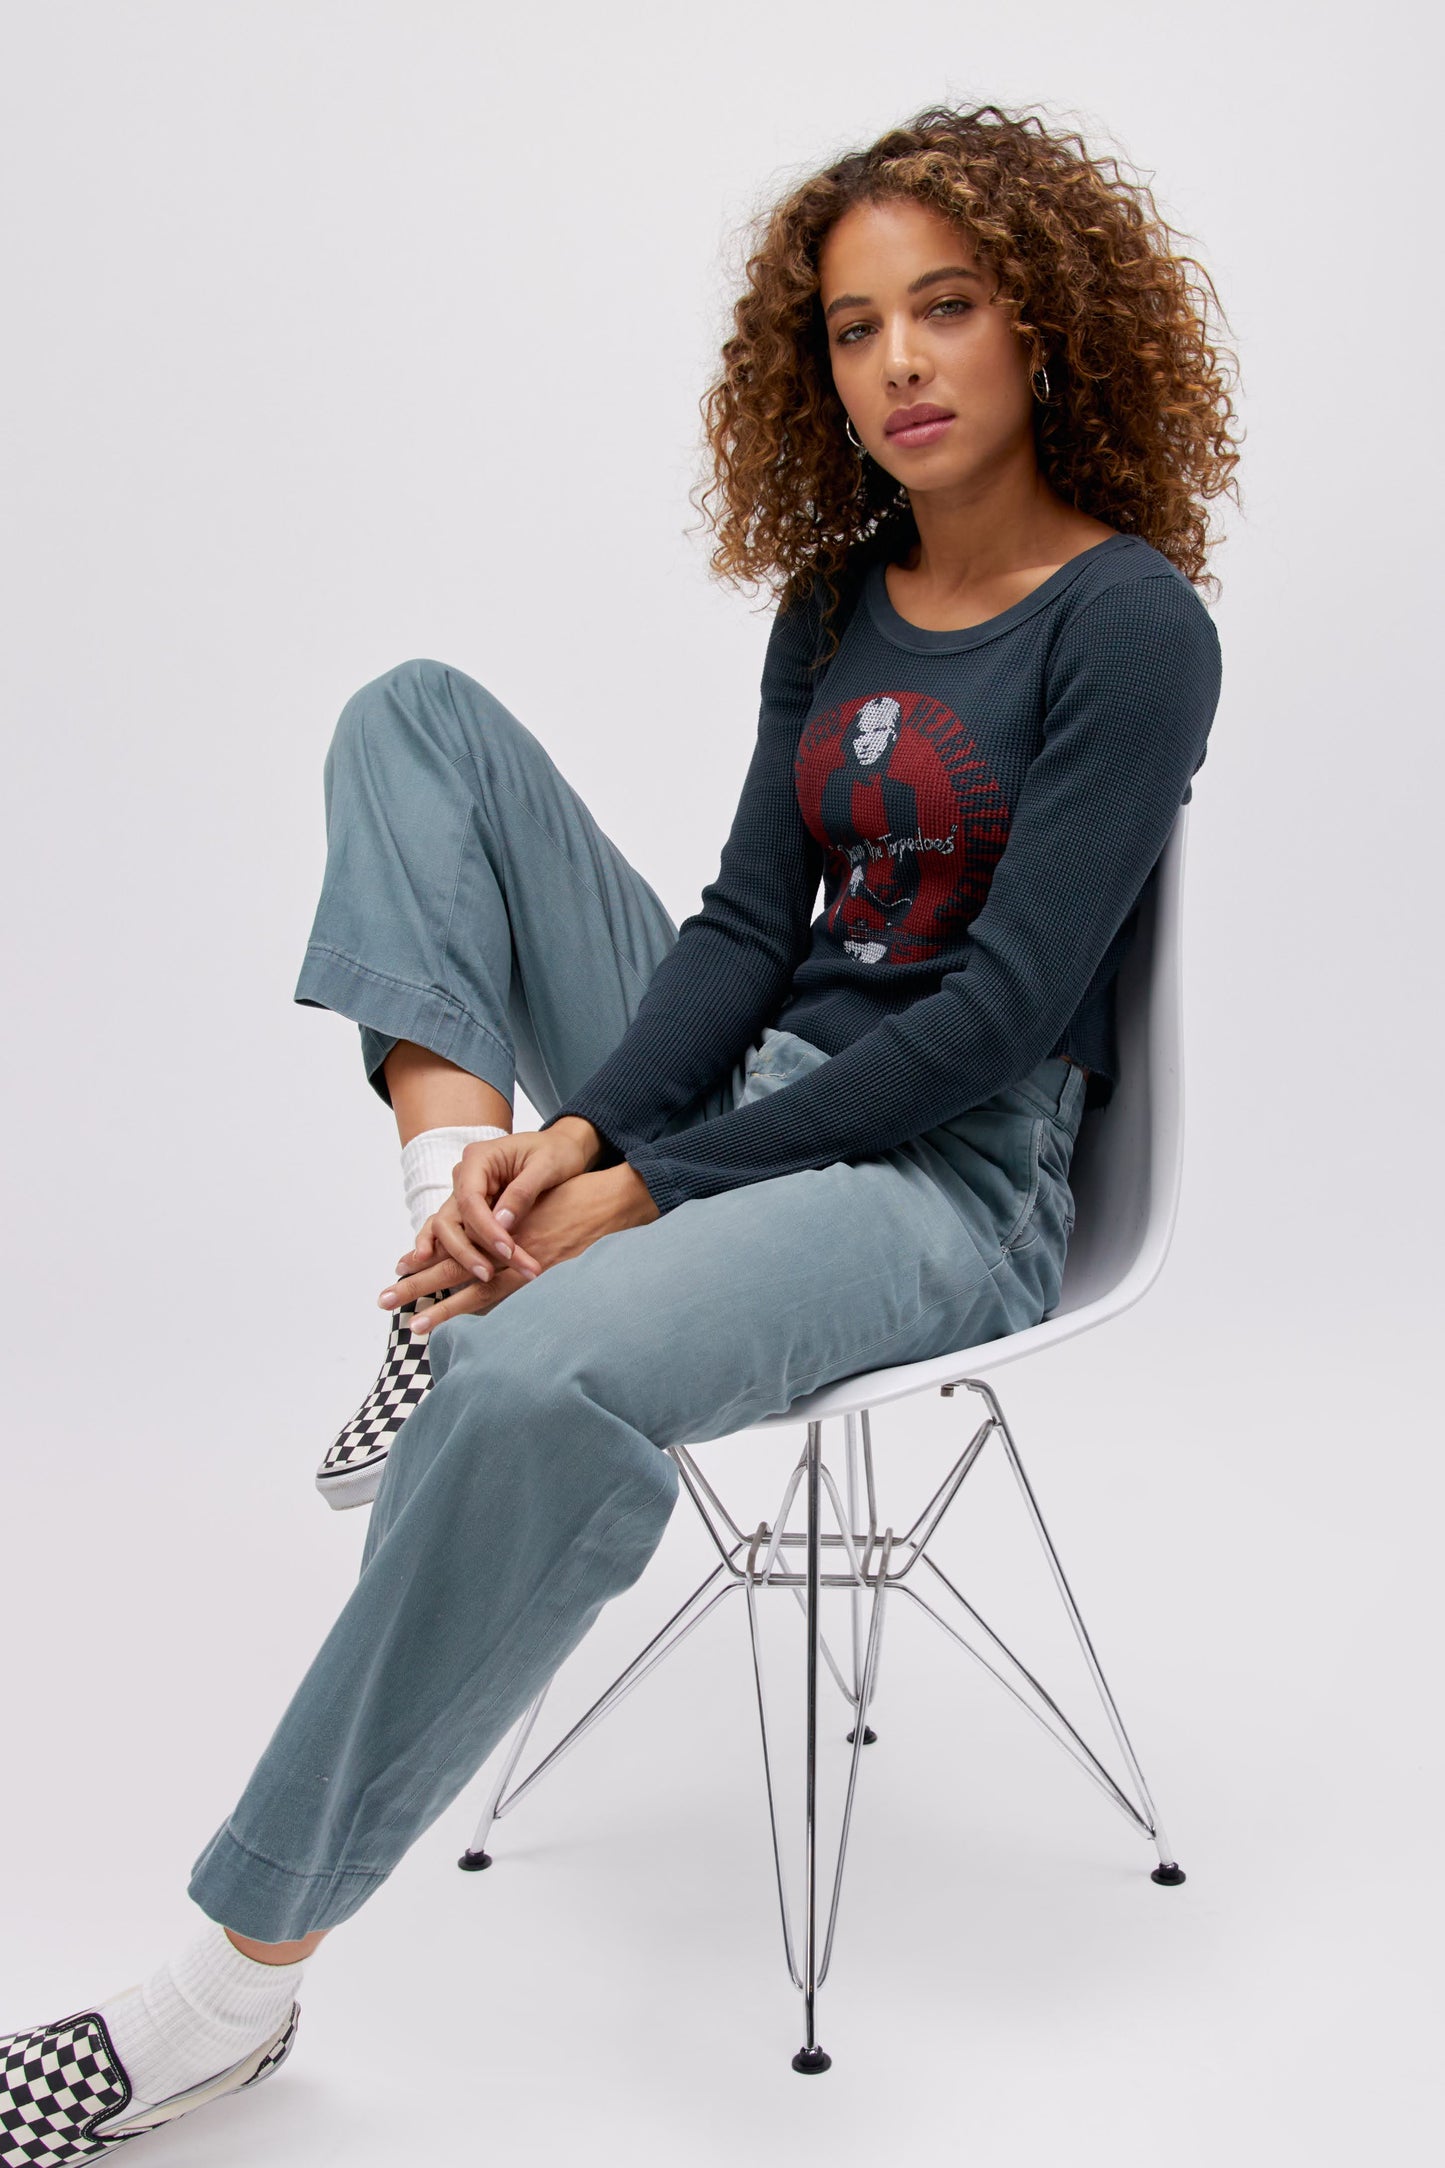 Curly haired model wearing a long sleeve thermal top with Tom Petty 'Damn The Torpedoes' graphic artwork.